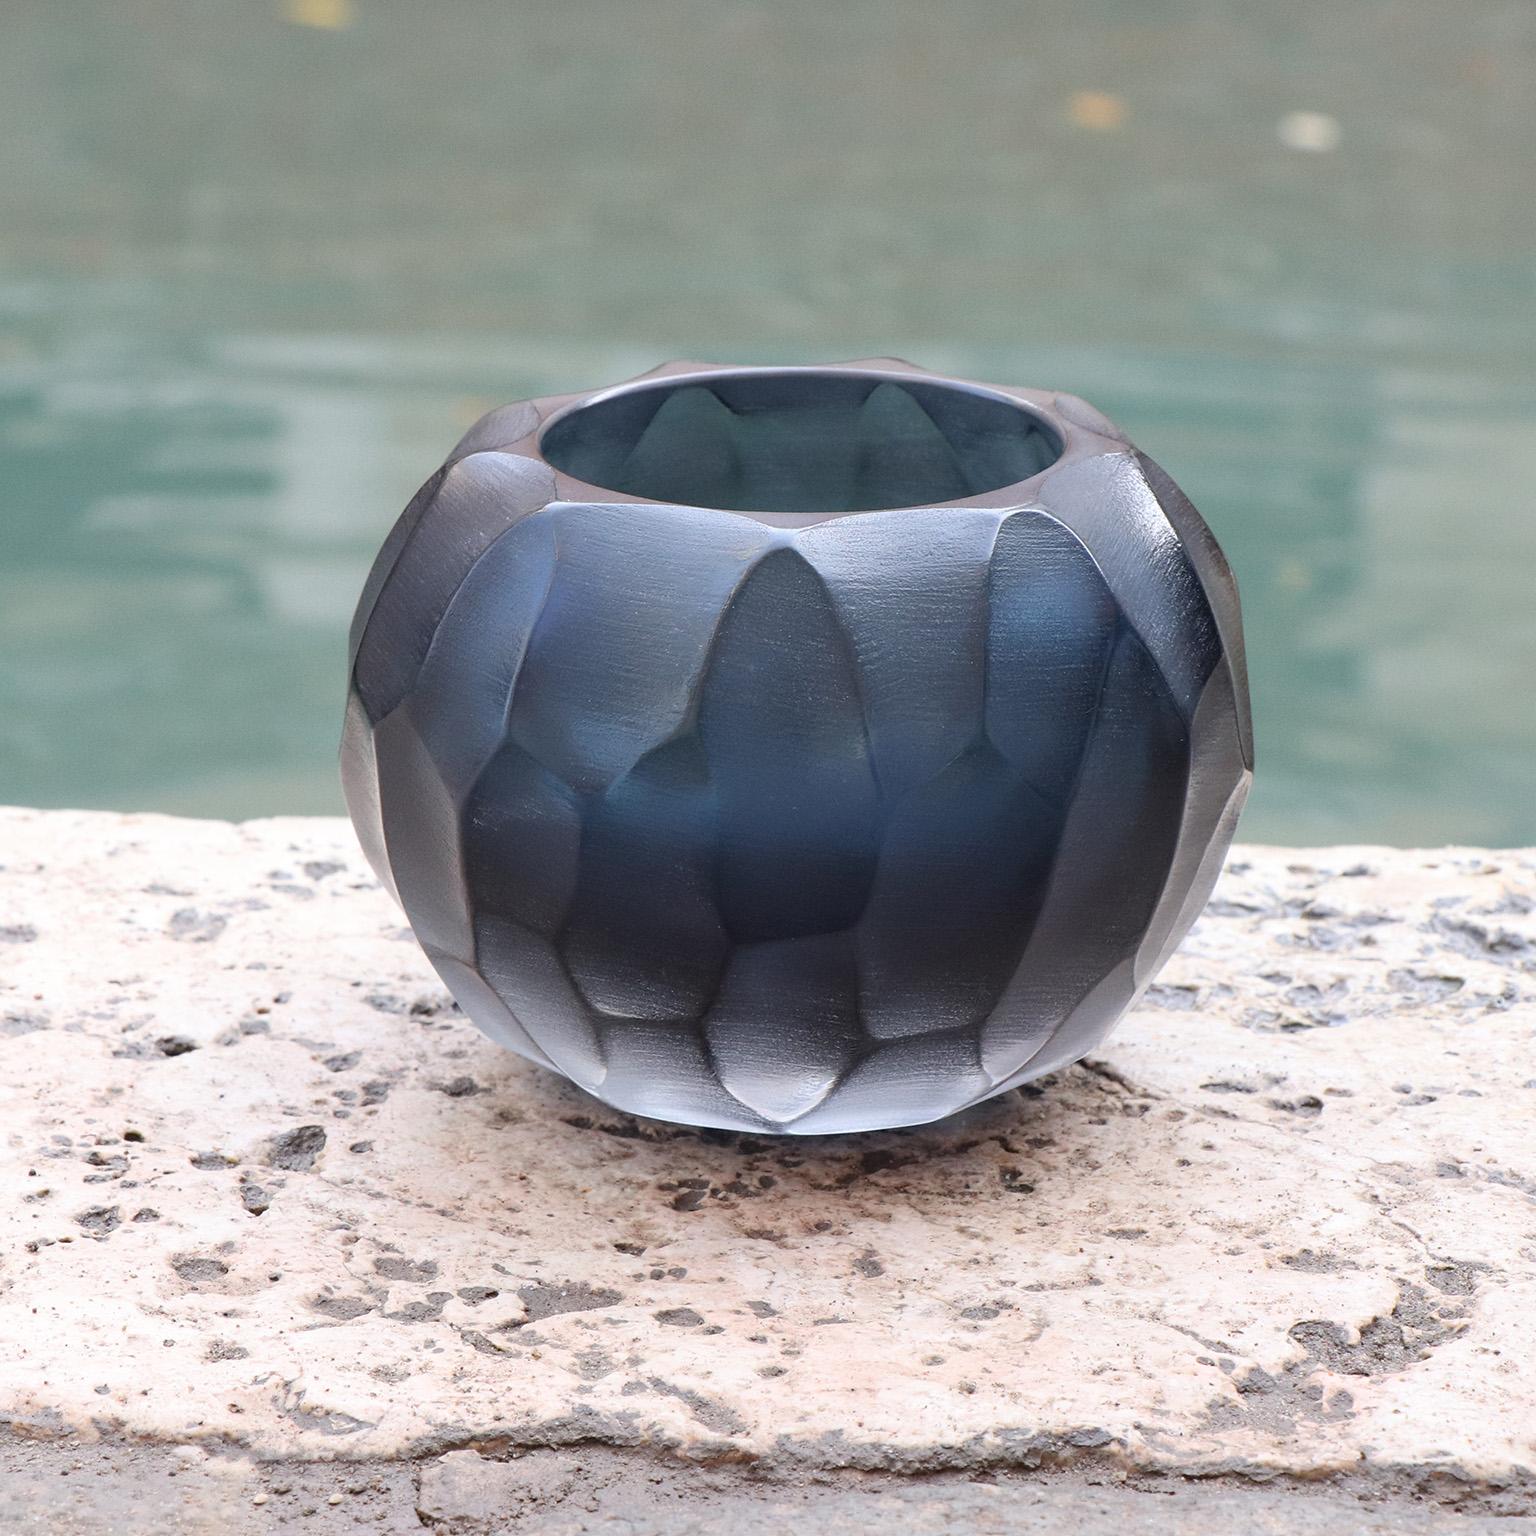 This small vase is called Bocia, a word from the Venetian dialect which means ‘little one’. Its round shape is achieved by first mouth blowing the molten glass. Once cooled the surface of the vase is finished with carving and polishing techniques